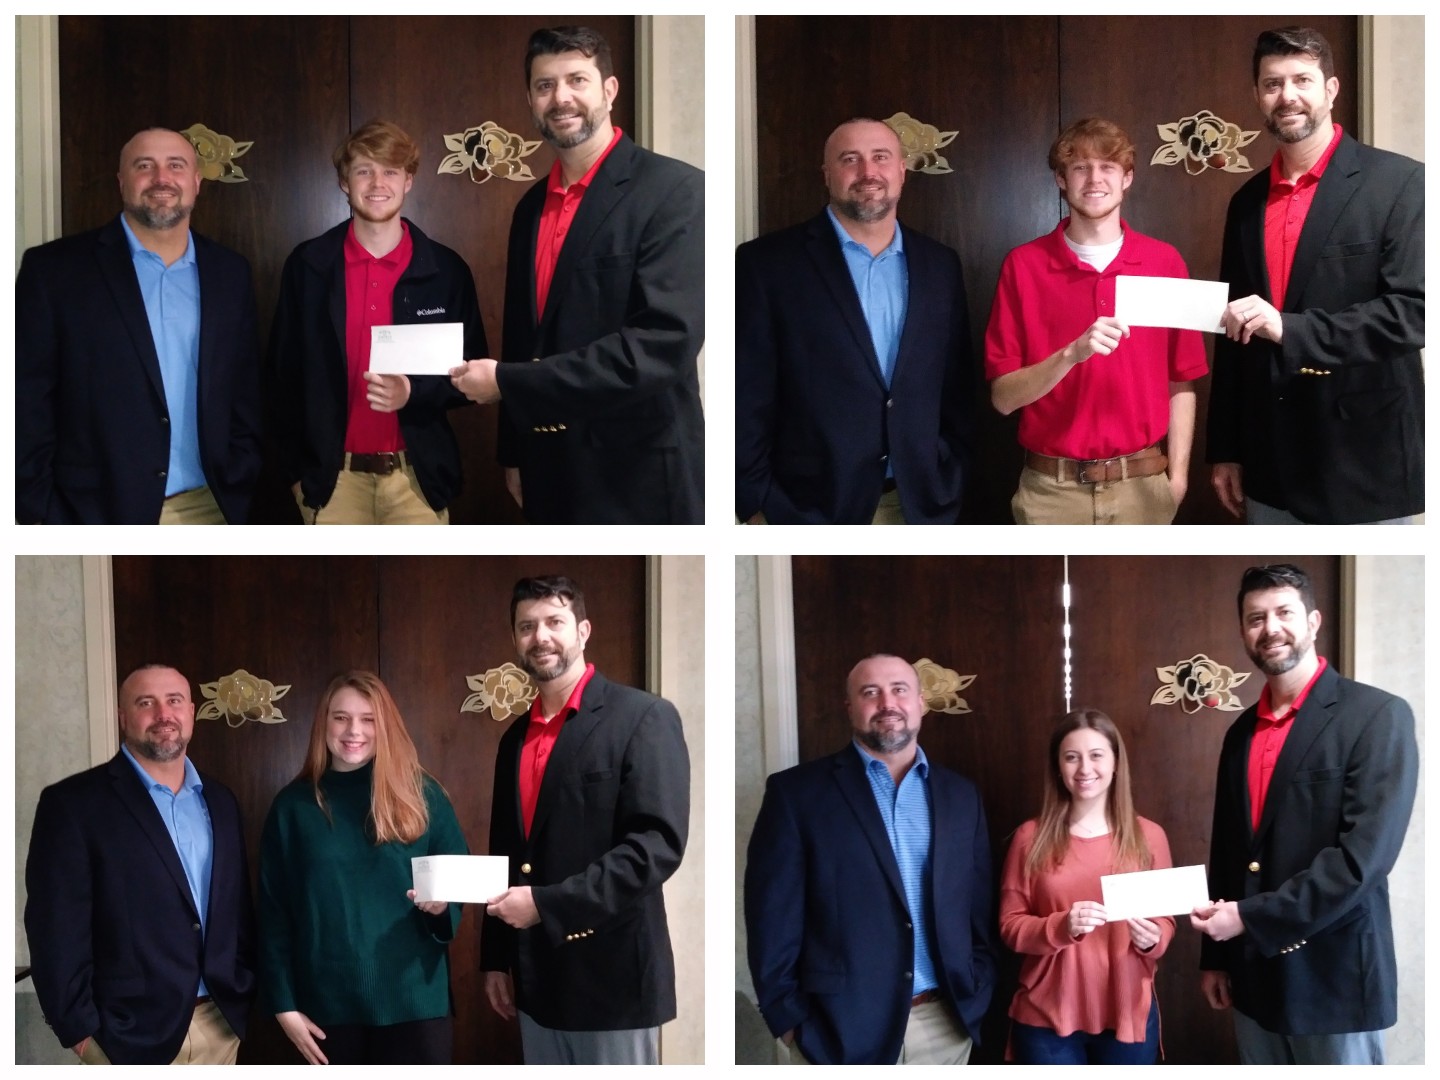 Collage photo of the four junior board scholarship recipients.